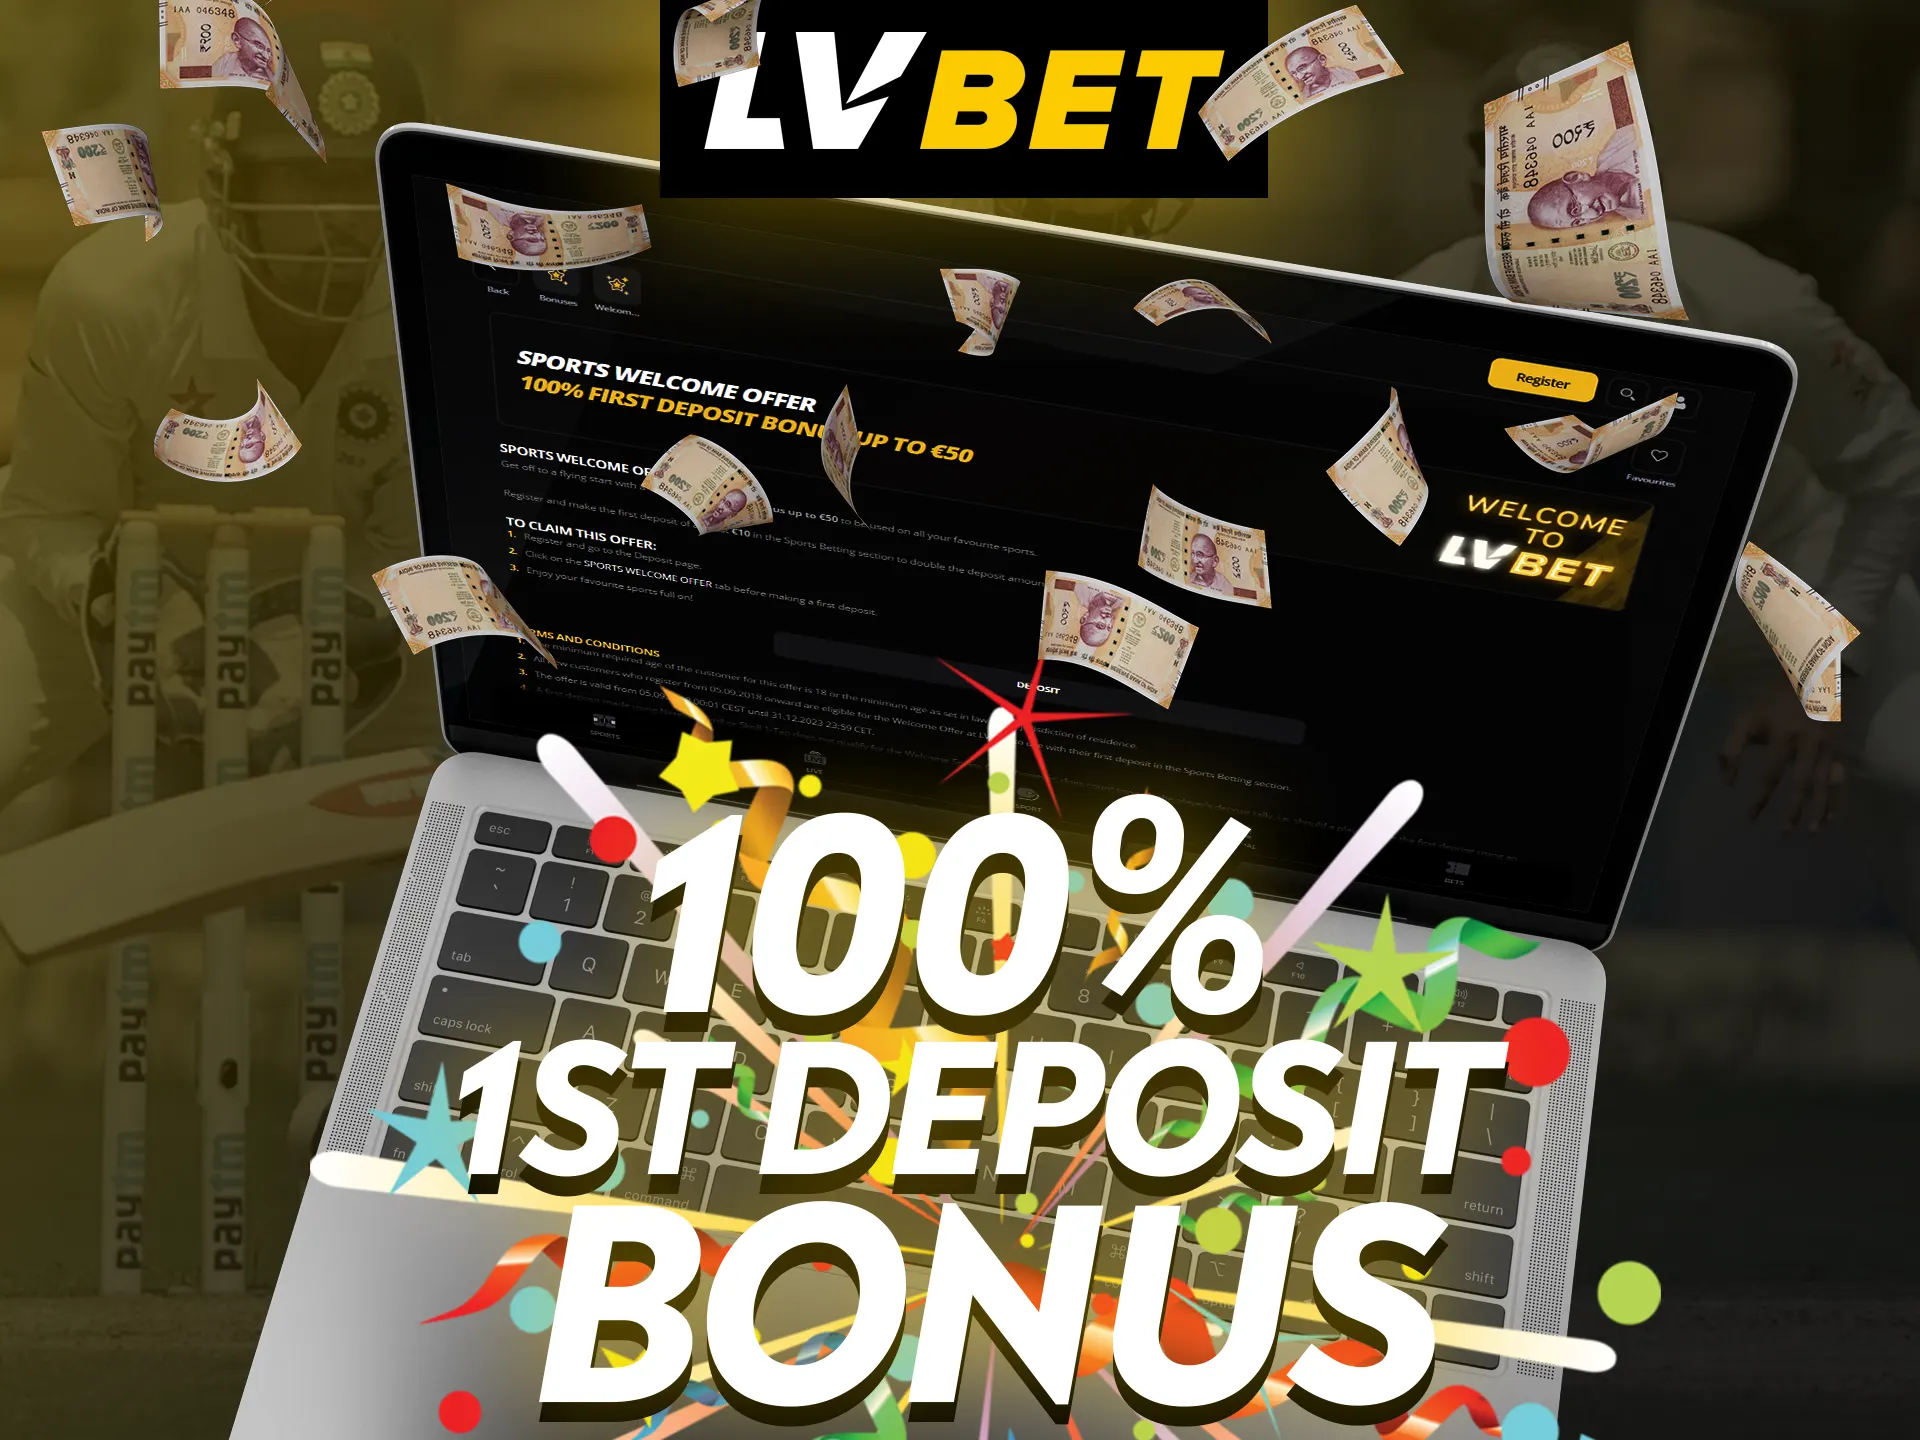 With LV Bet, get a favorable bonus after your first deposit.